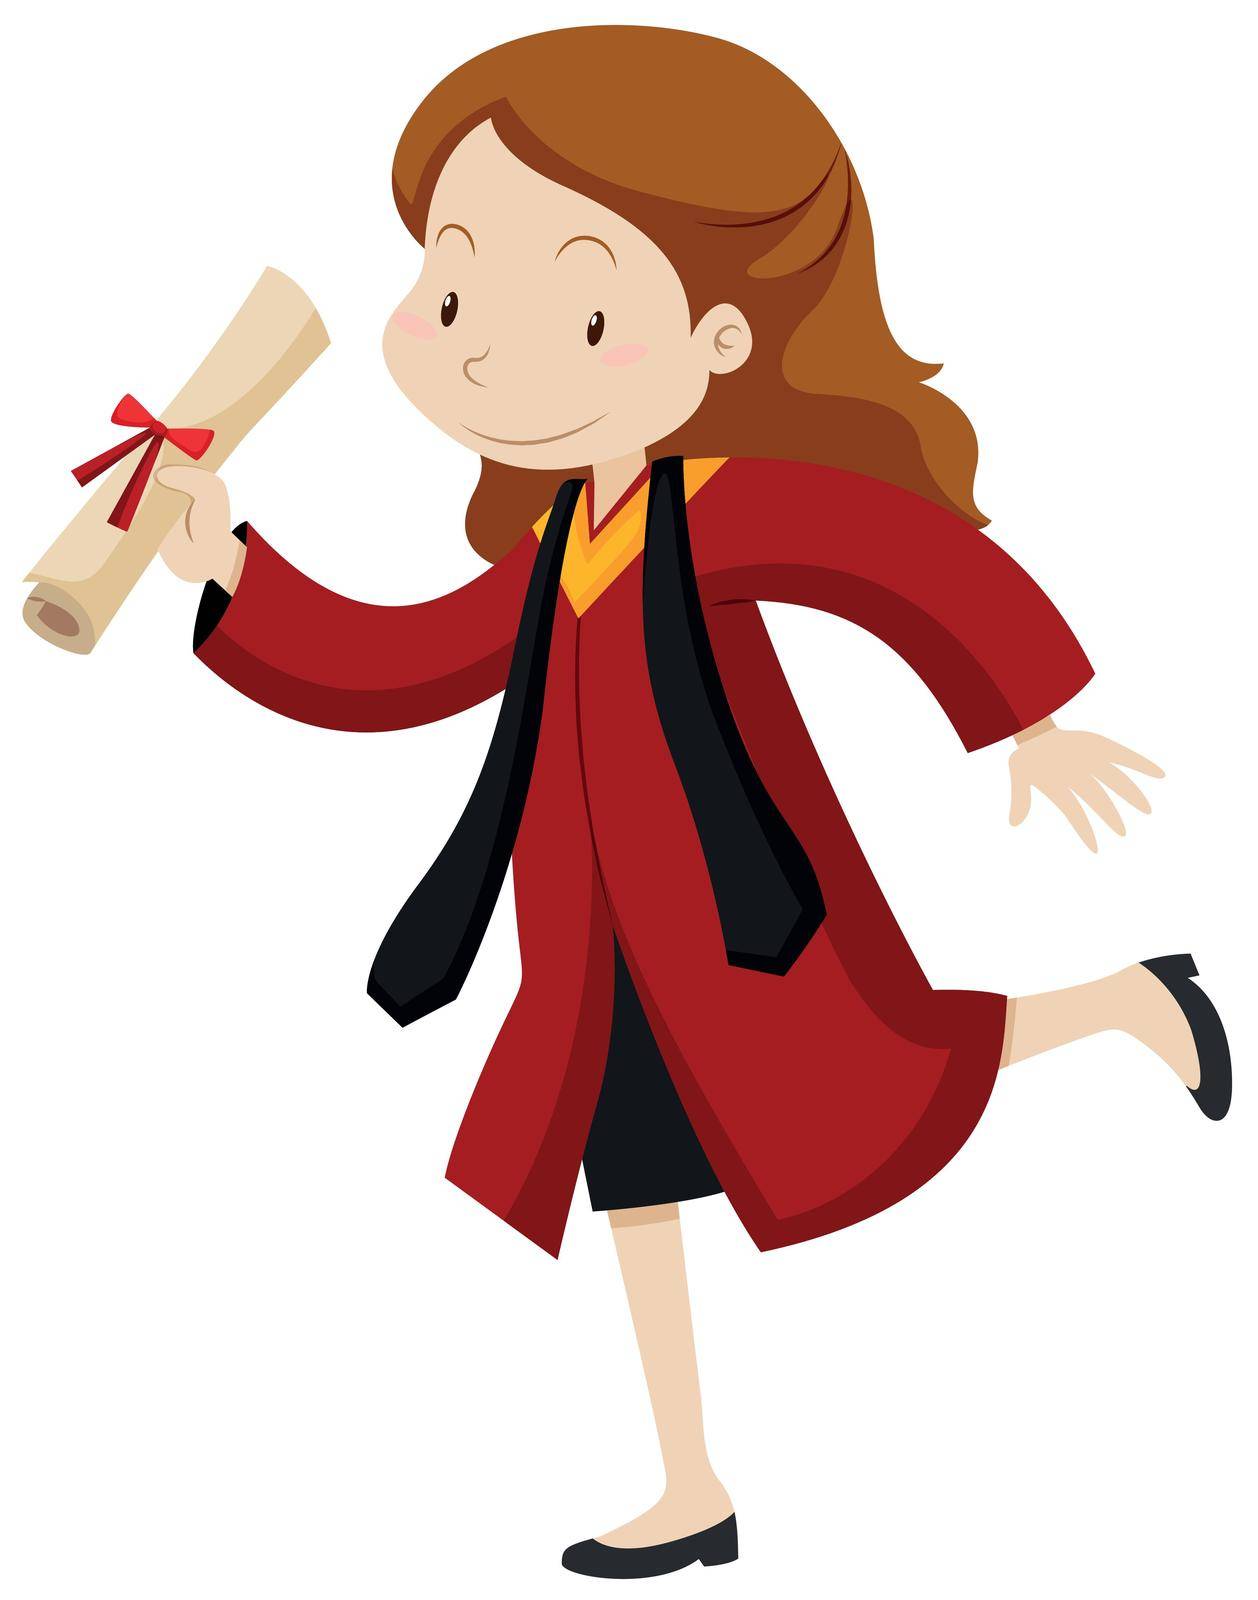 Woman in red graduation gown illustration